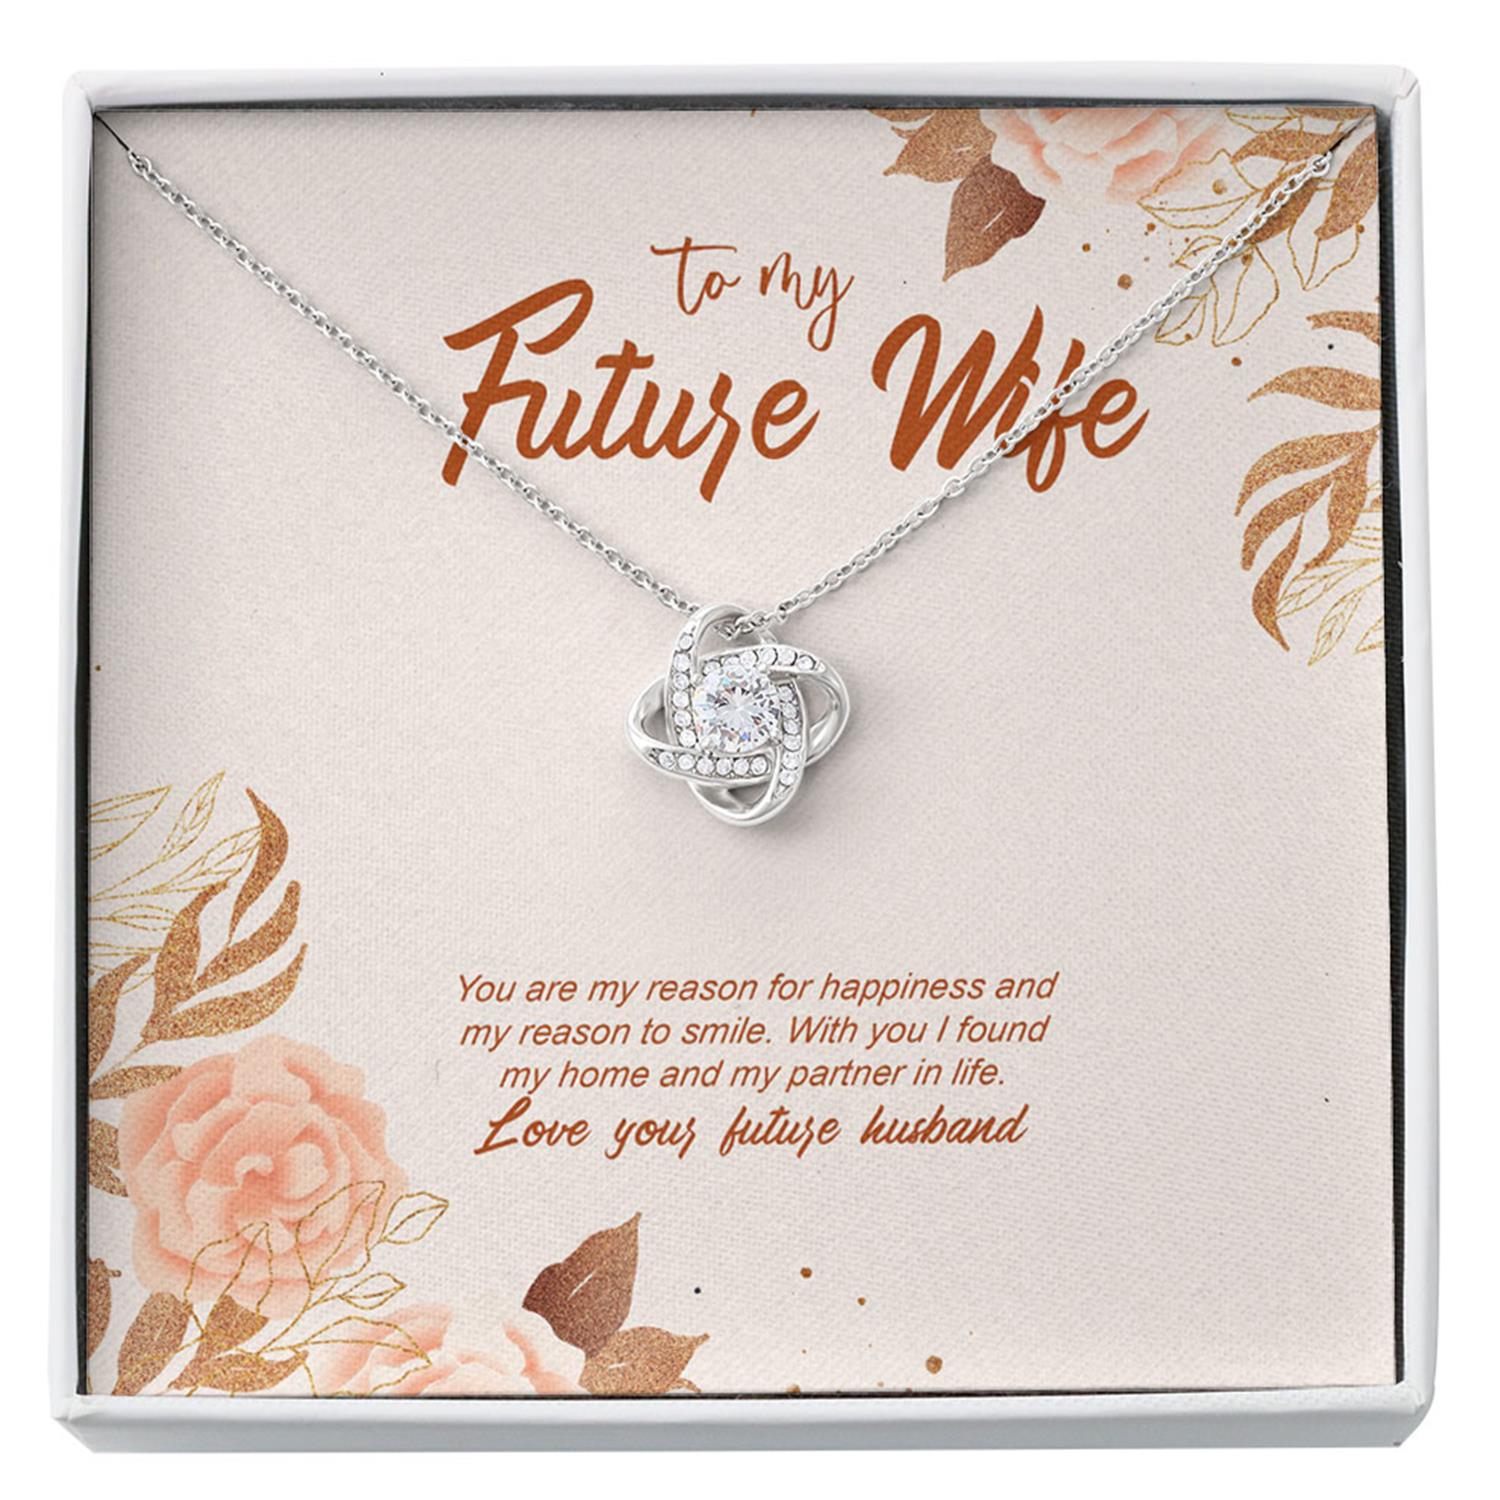 Future Wife Necklace, Future Wife Gift Bride Wedding Gift From Groom Love Necklace Bride Necklace Husband Gift Love Of Life Heartfelt Wife Wedding Custom Necklace